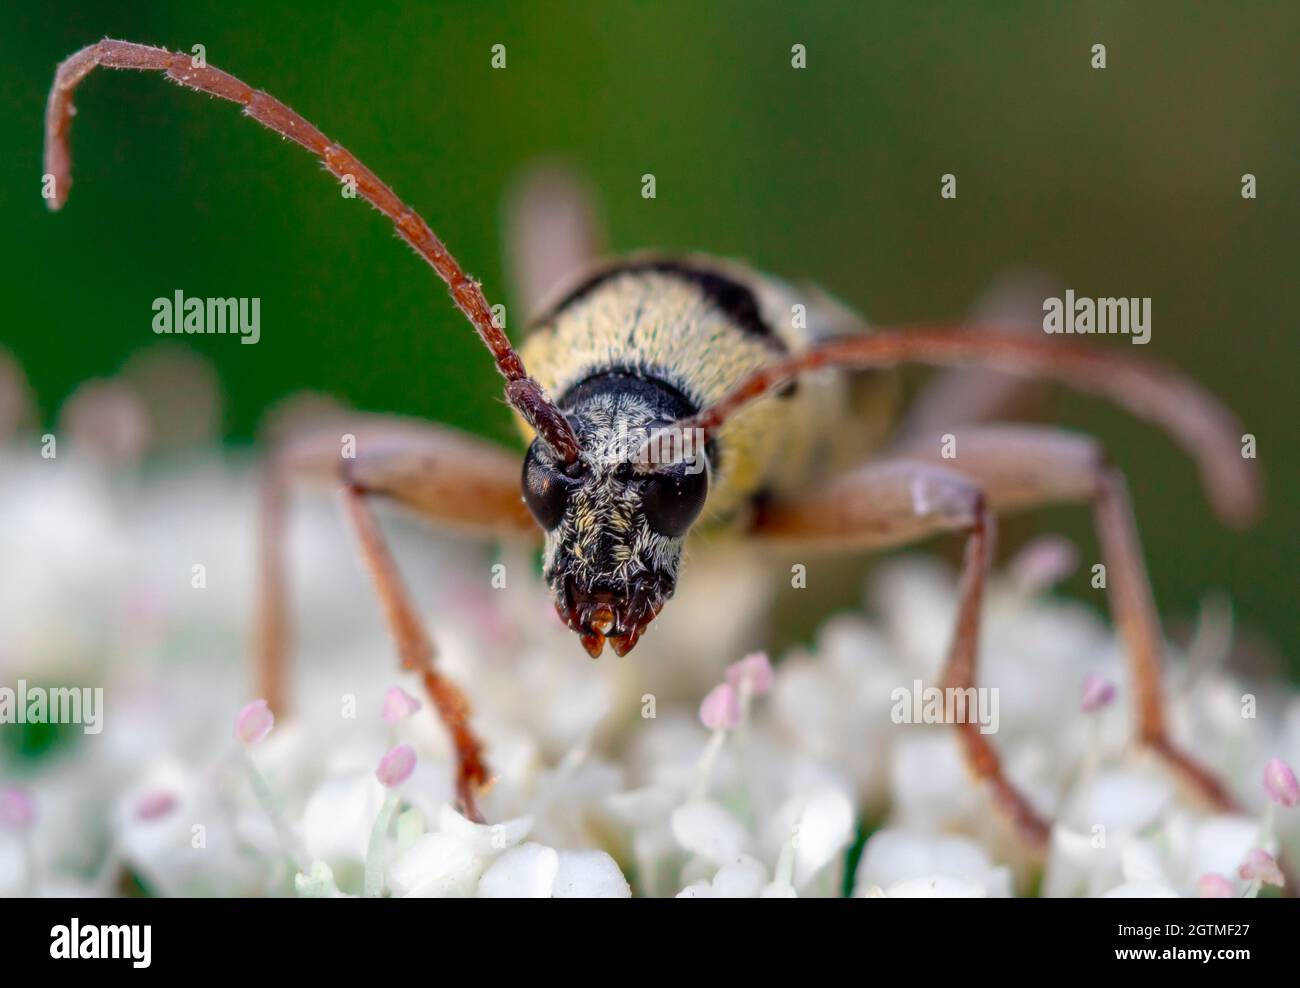 The Beetles Are Part Of Israels Wildlife Stock Photo